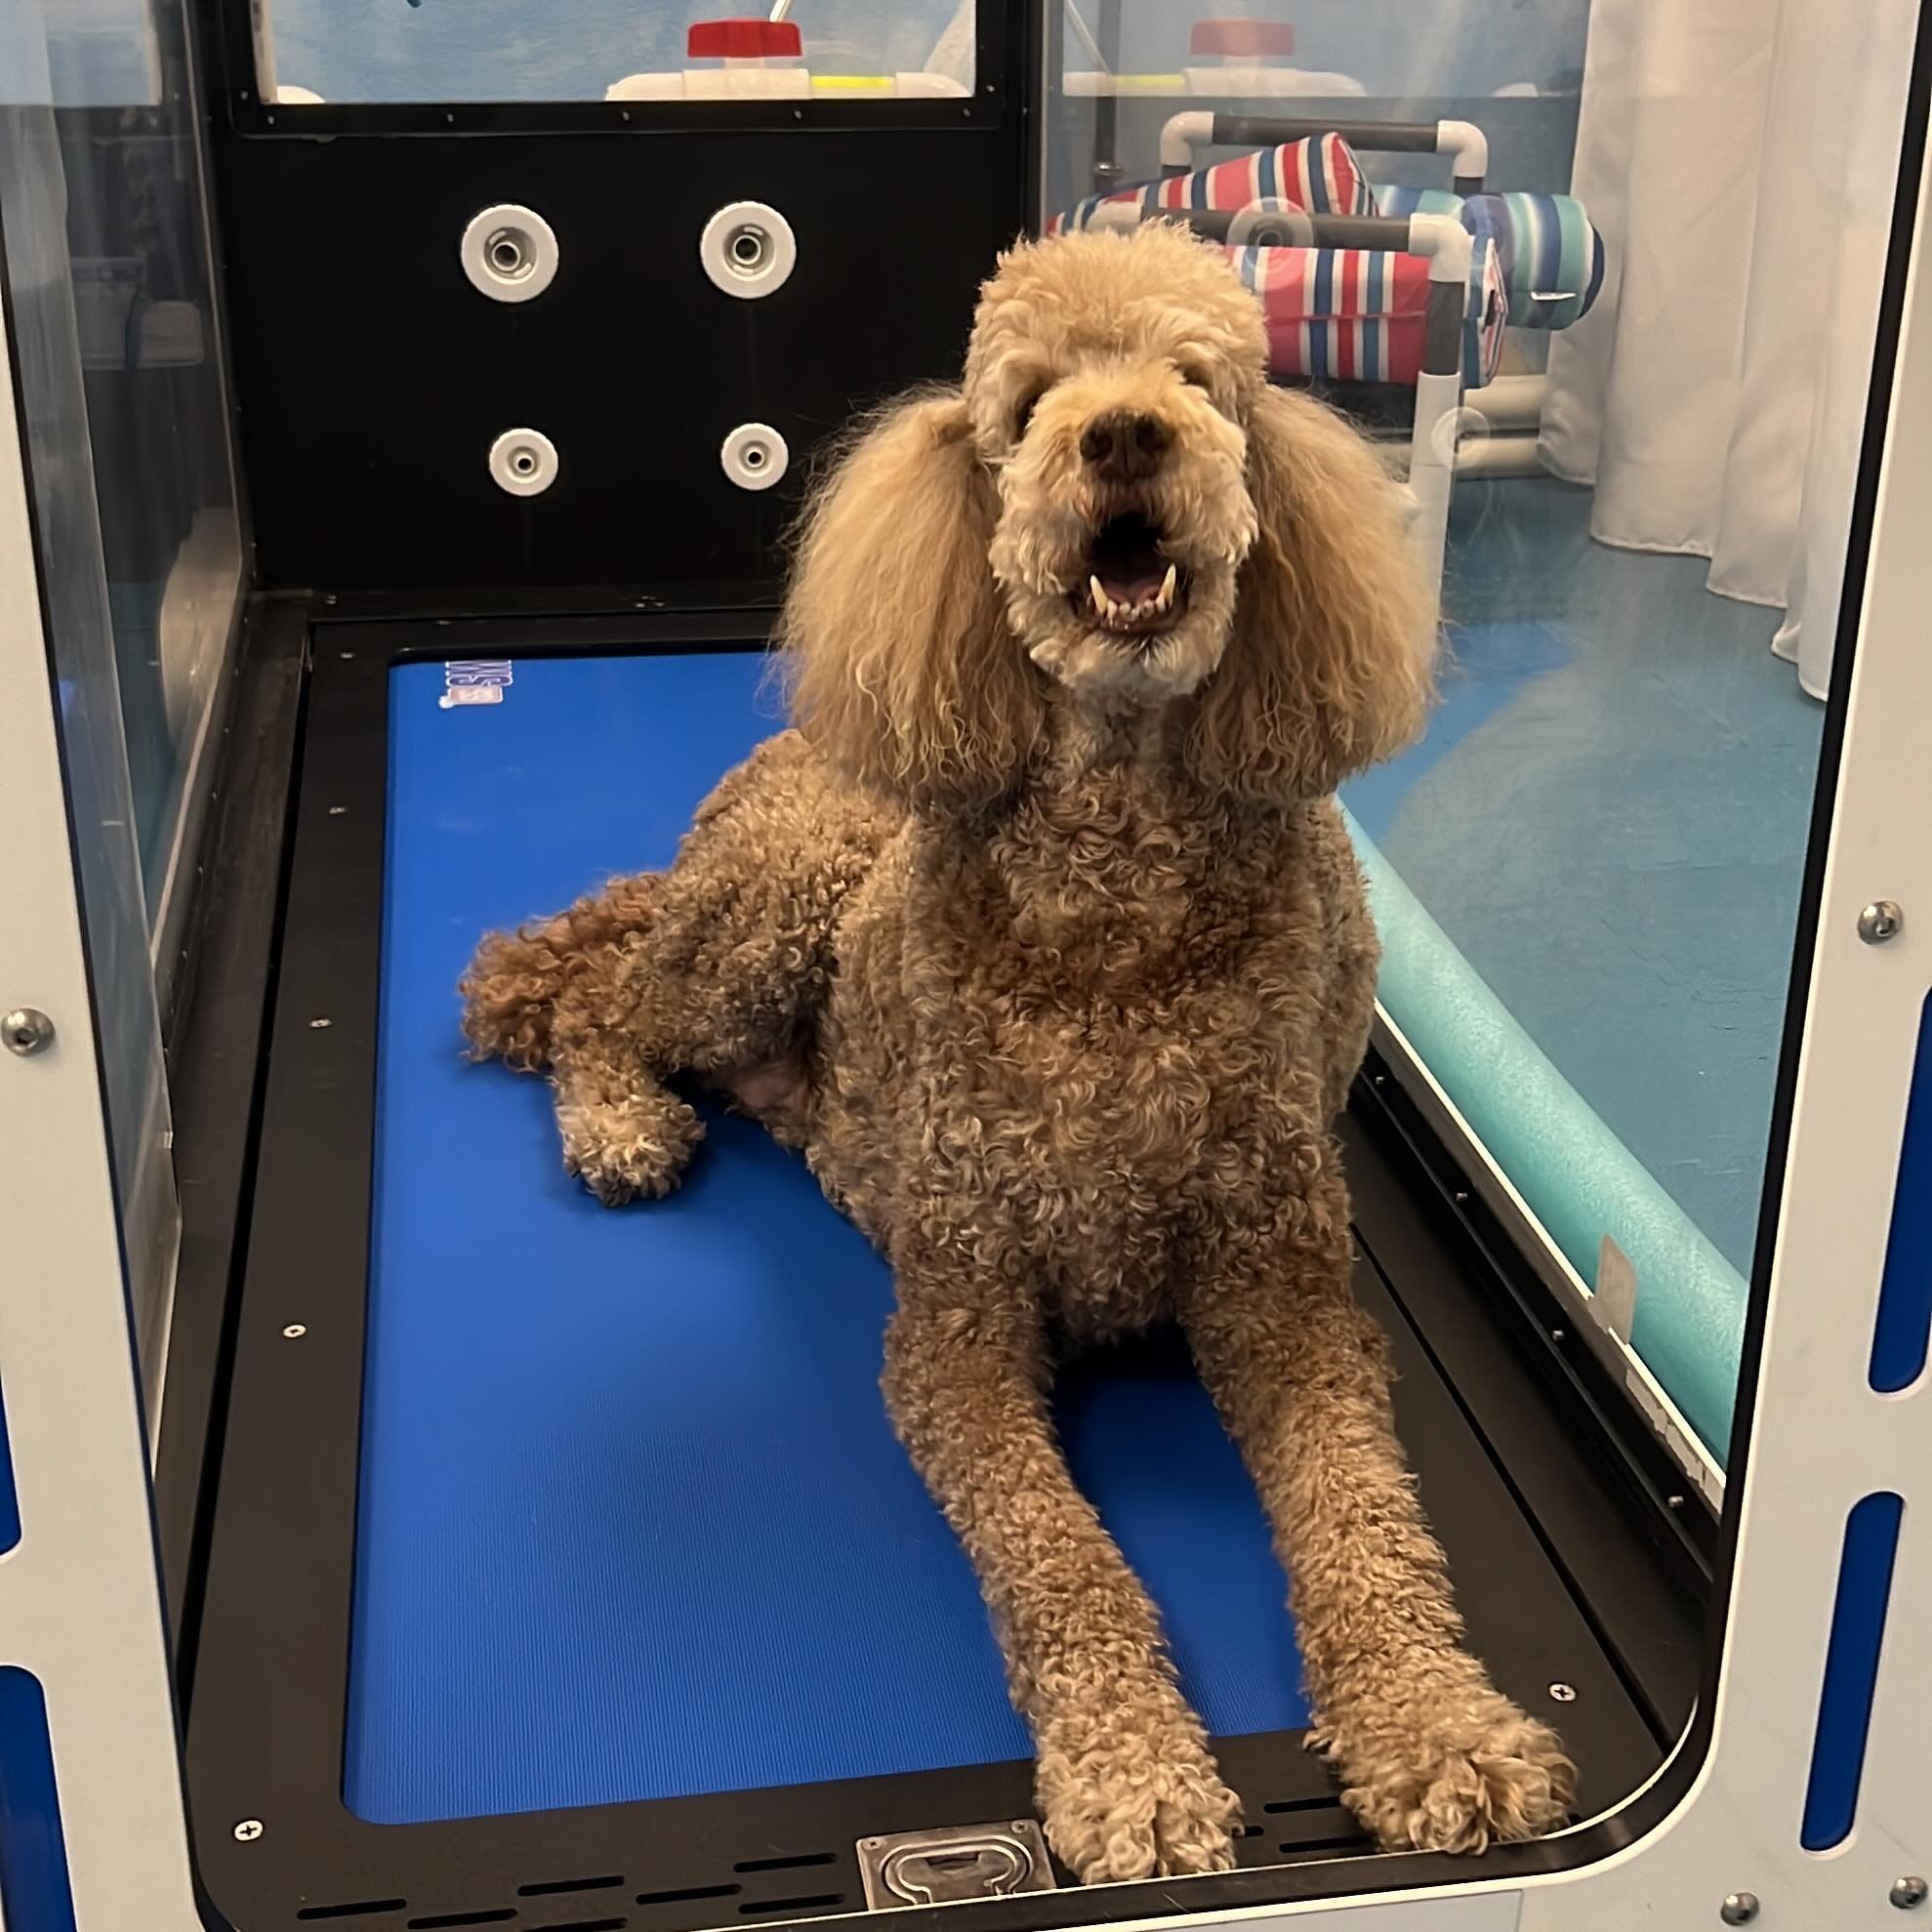 My friend Jack came in for therapy today and went straight into the #underwatertreadmill and waited for me! He&rsquo;s doing great! The latest report is that he can now walk on hardwood floors without wearing booties because he has built the muscle s